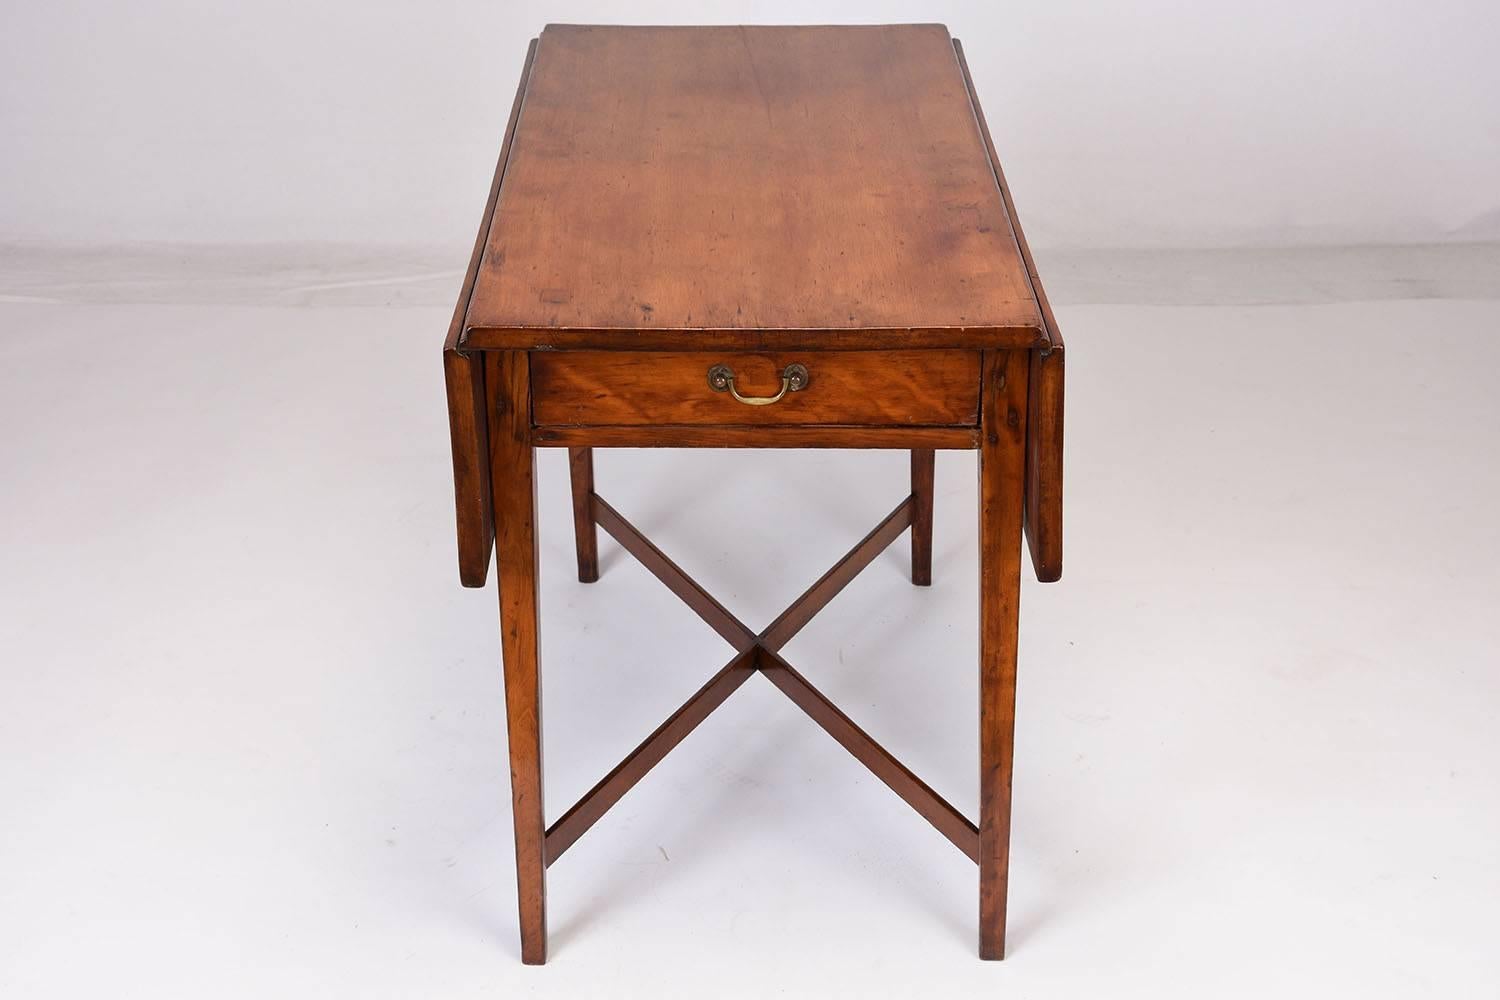 This 1880s English Sheraton Pembroke-style side table is made of mahogany wood with its beautiful original mid wood tone finish. There are two leafs that extend on either side of the side table for extra space. The stretched legs form an X-shape